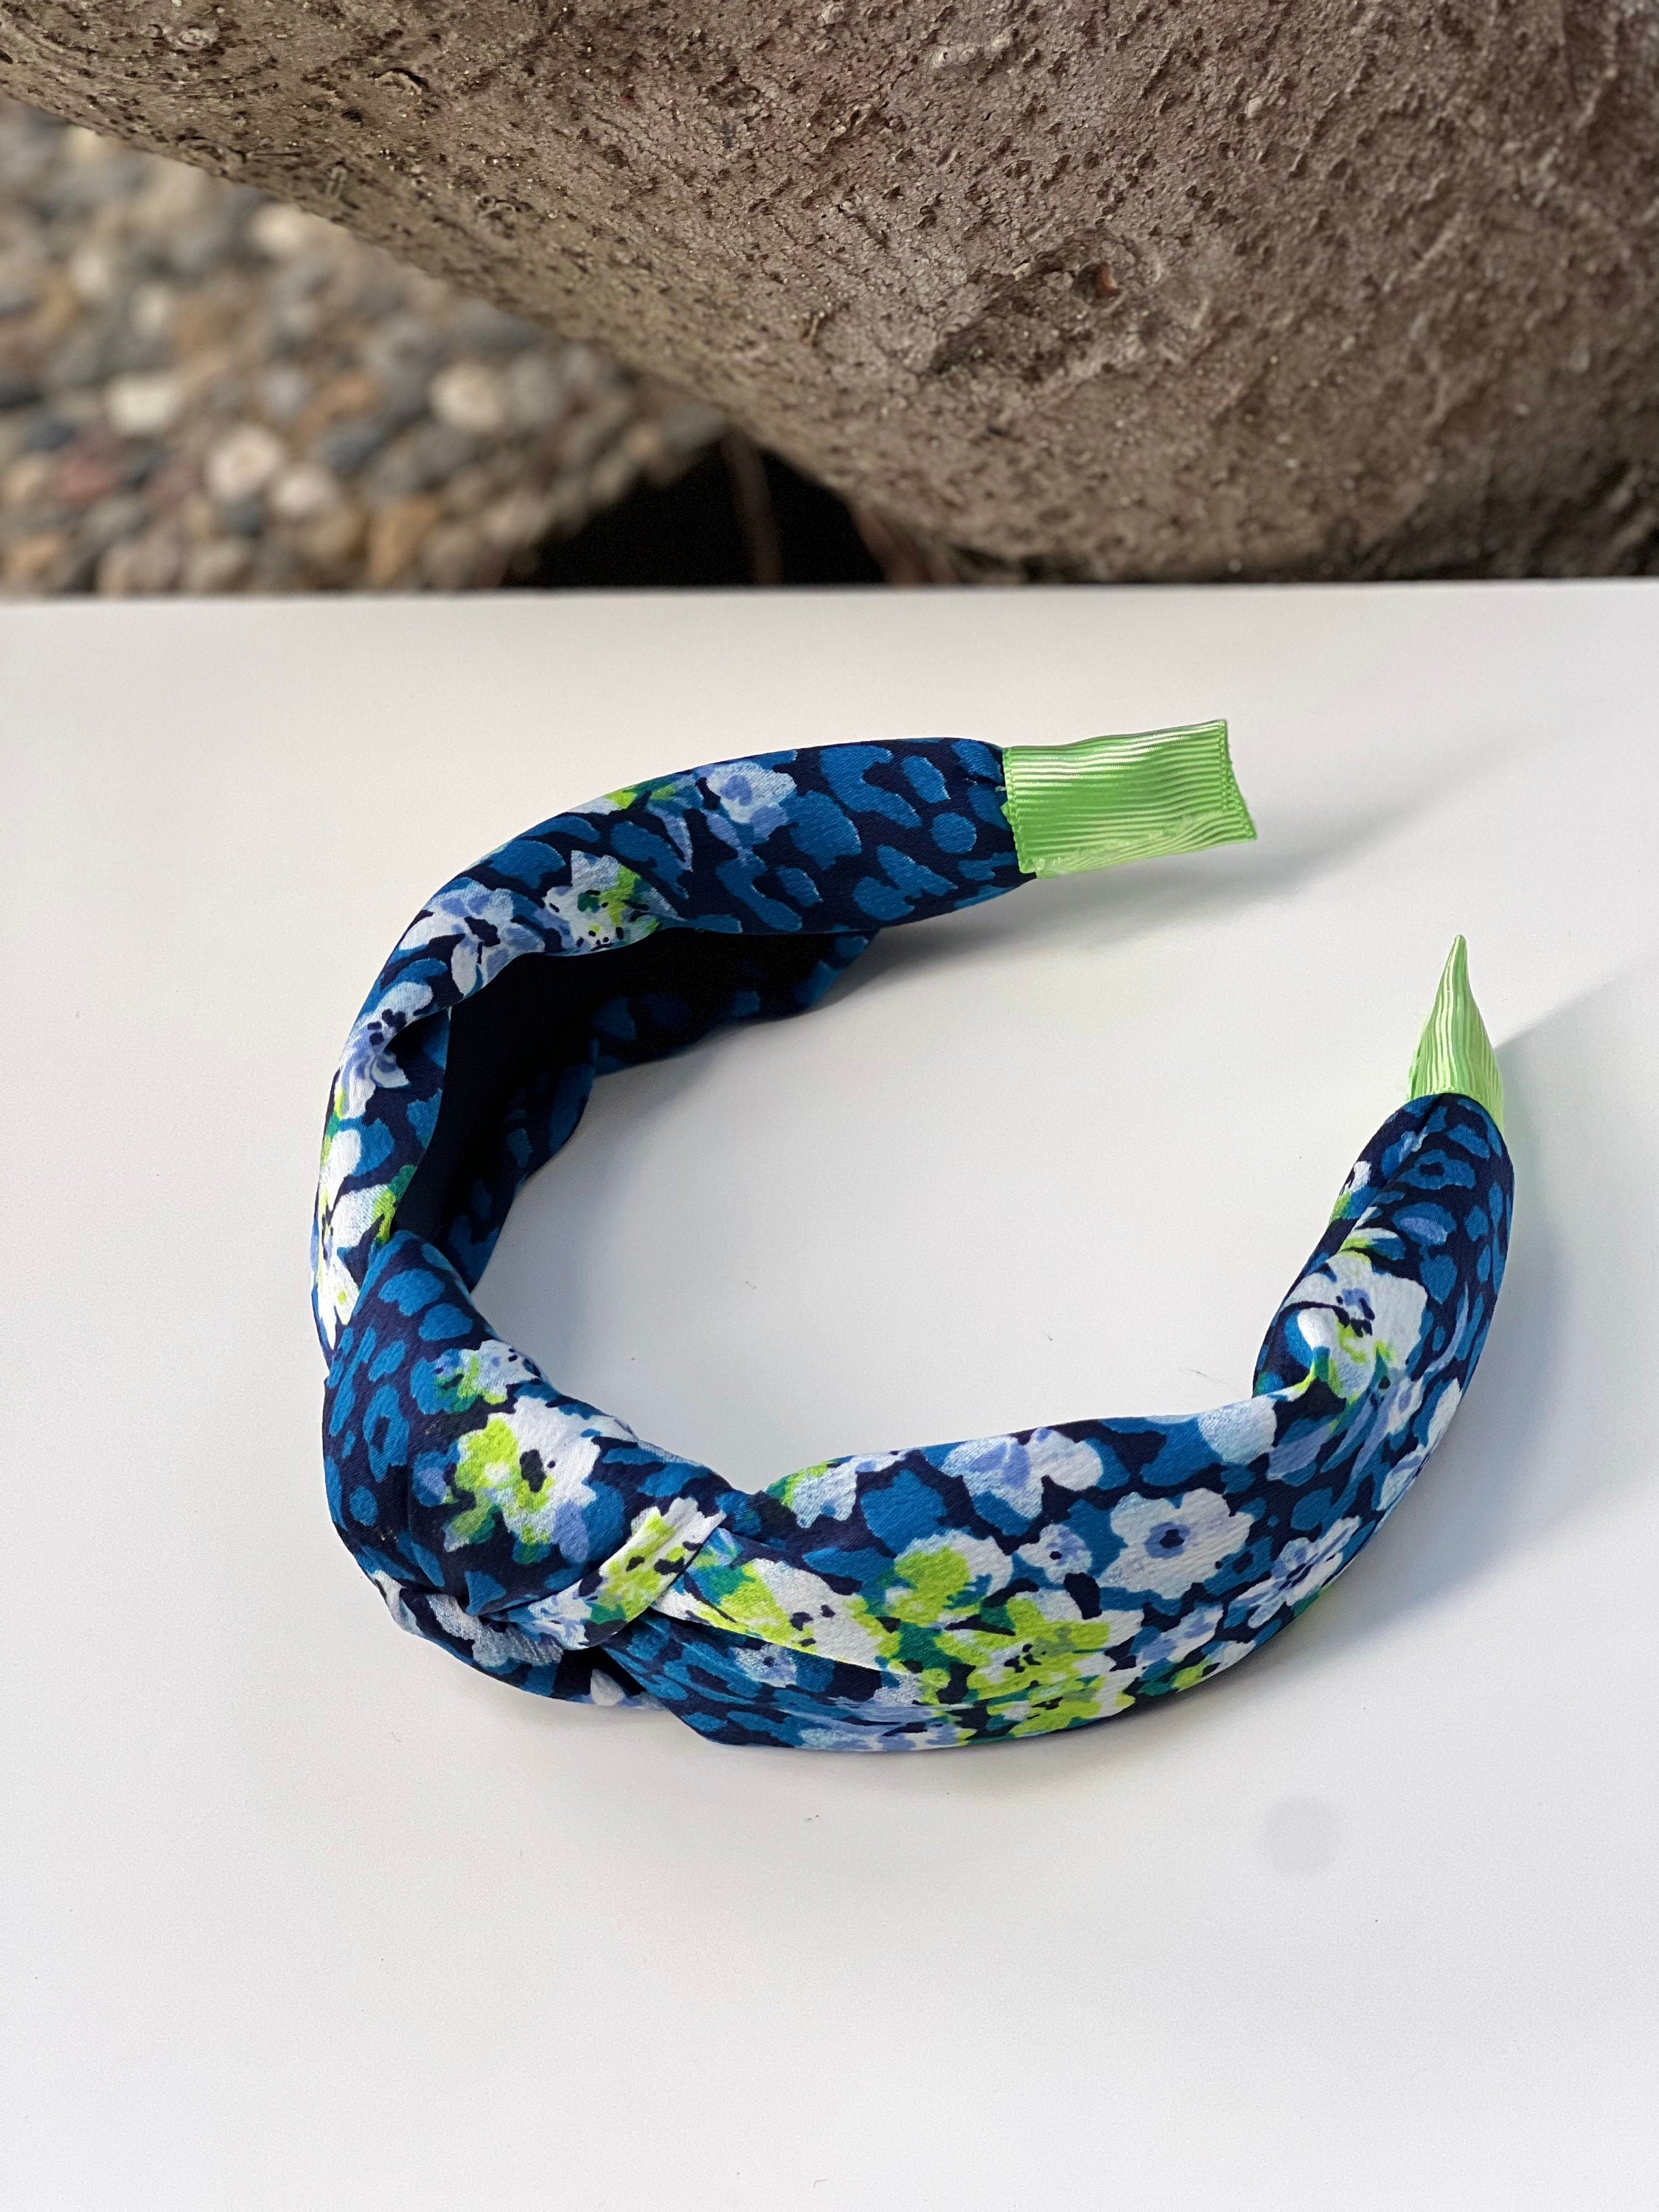 A Shiny Knotted Headband in a beautiful floral pattern that&#39;s perfect for adding some flair to your hair.